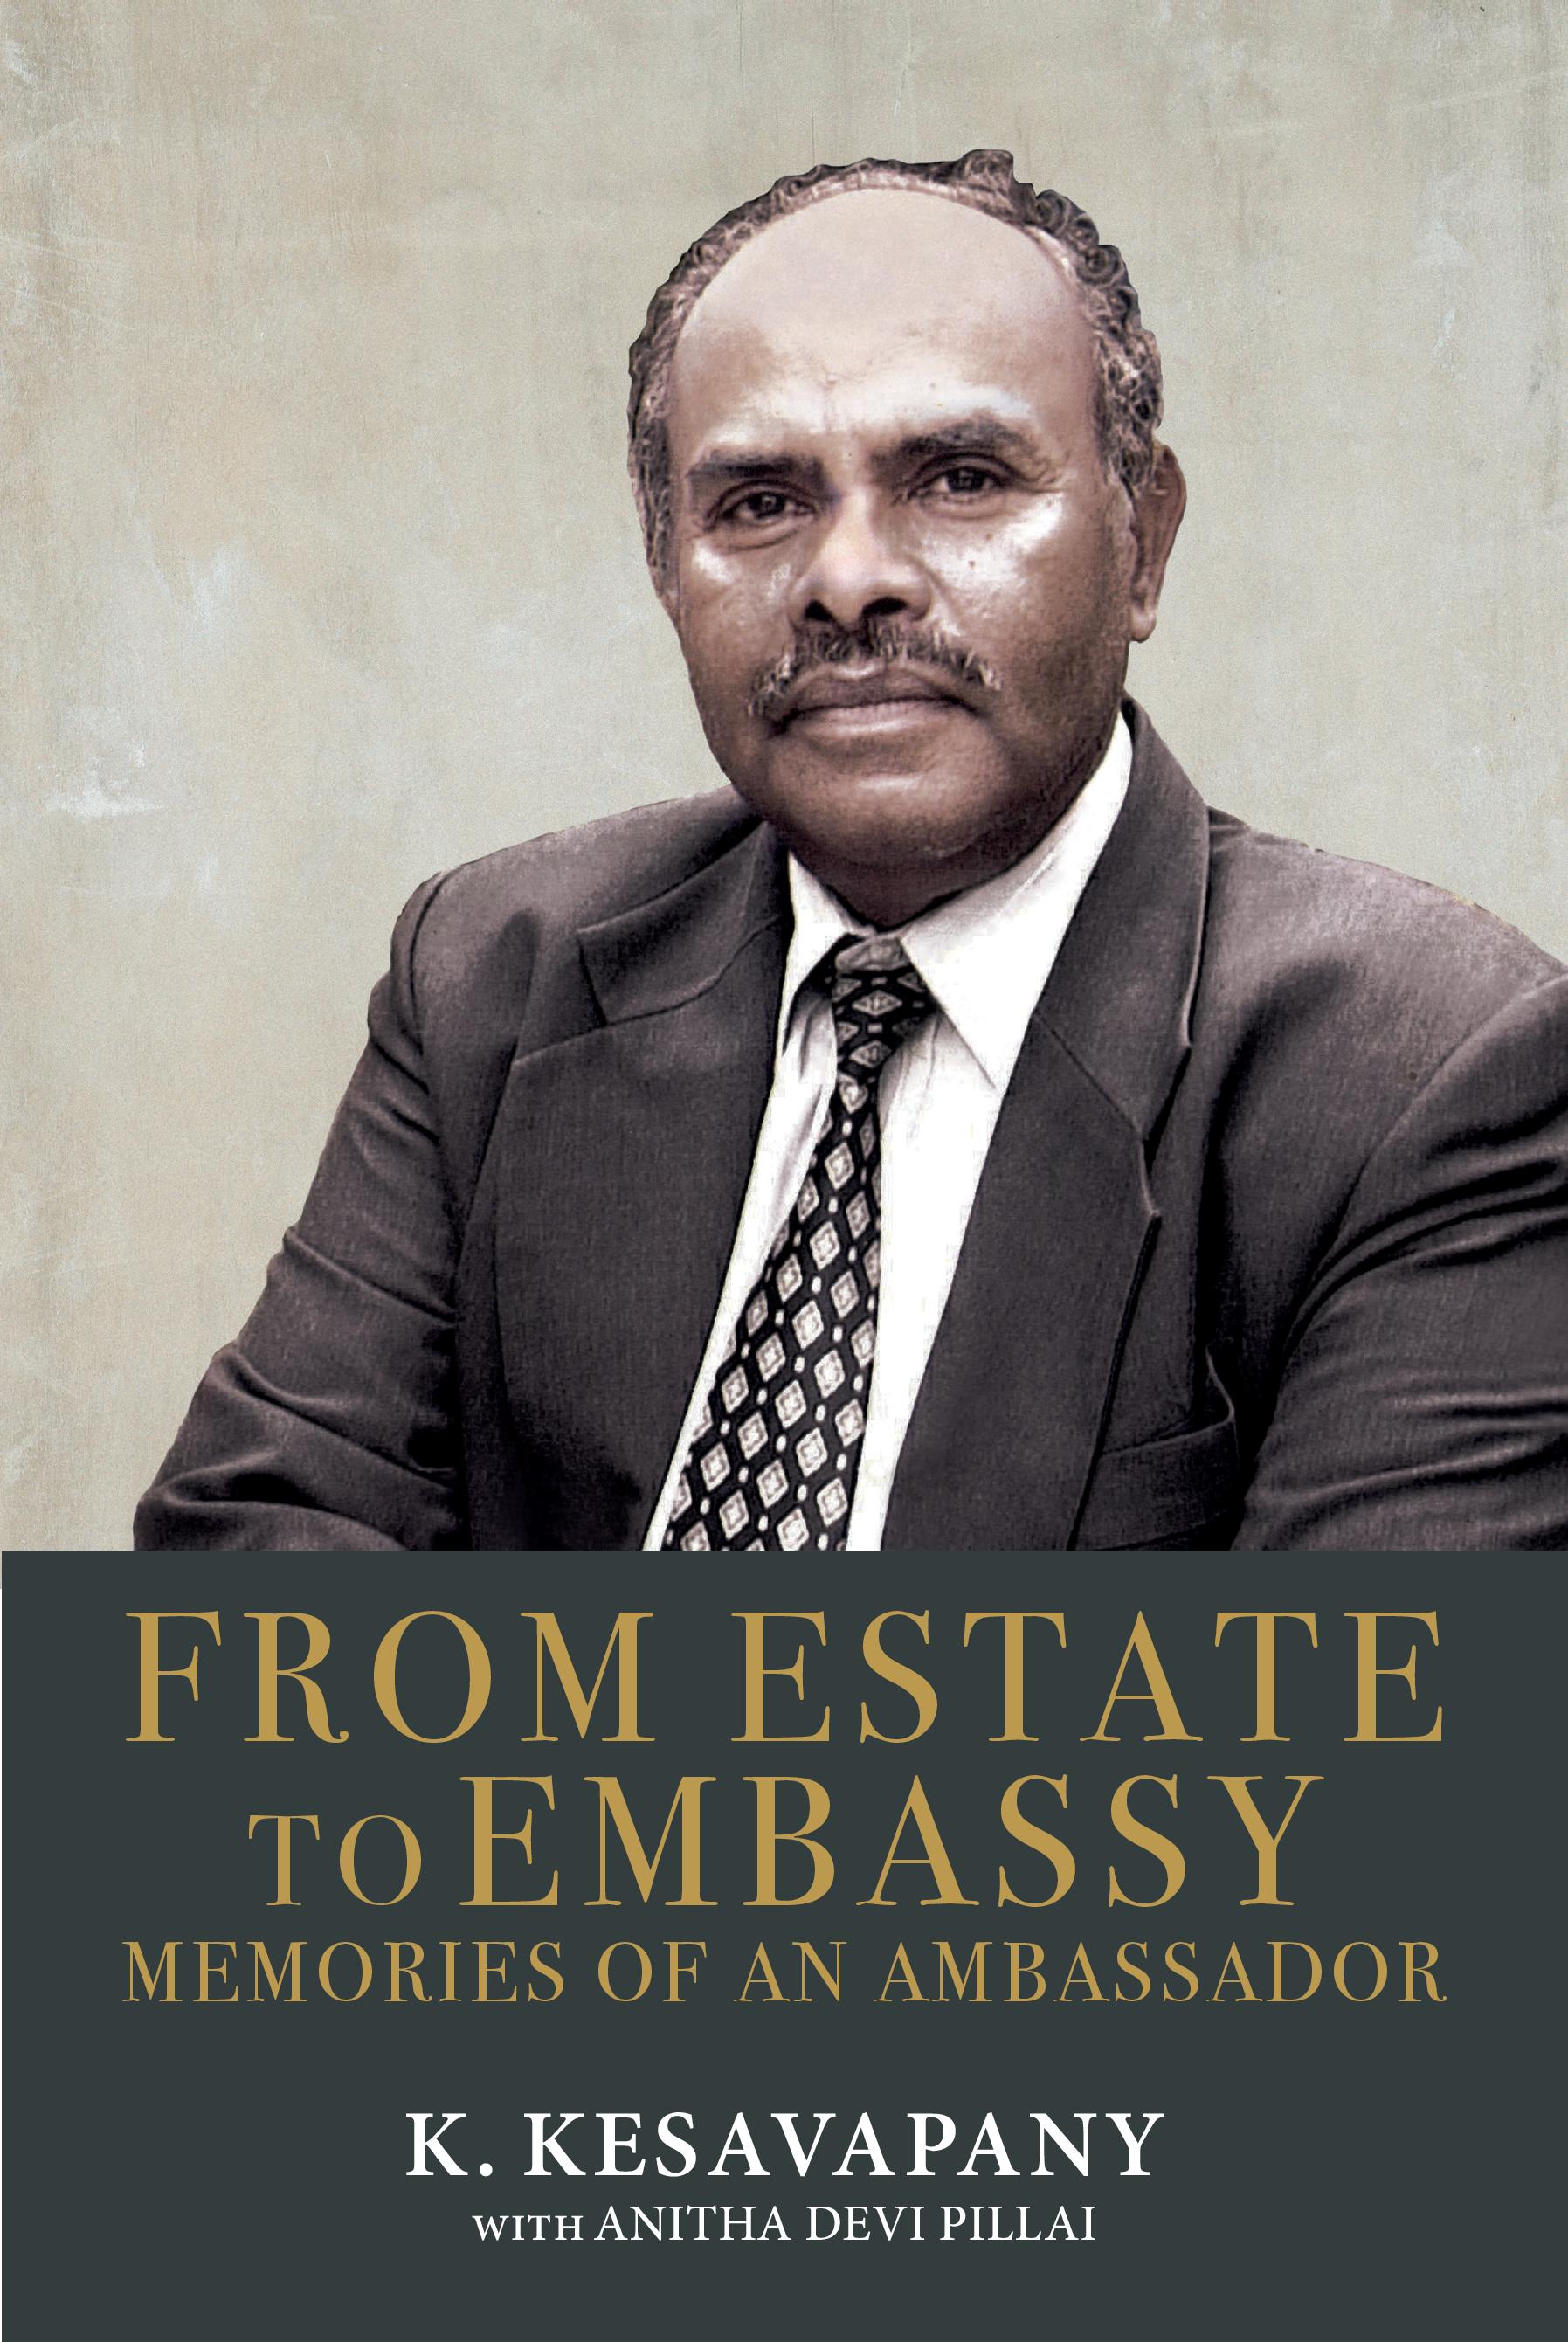 From Estate to Embassy: Memories of an Ambassador